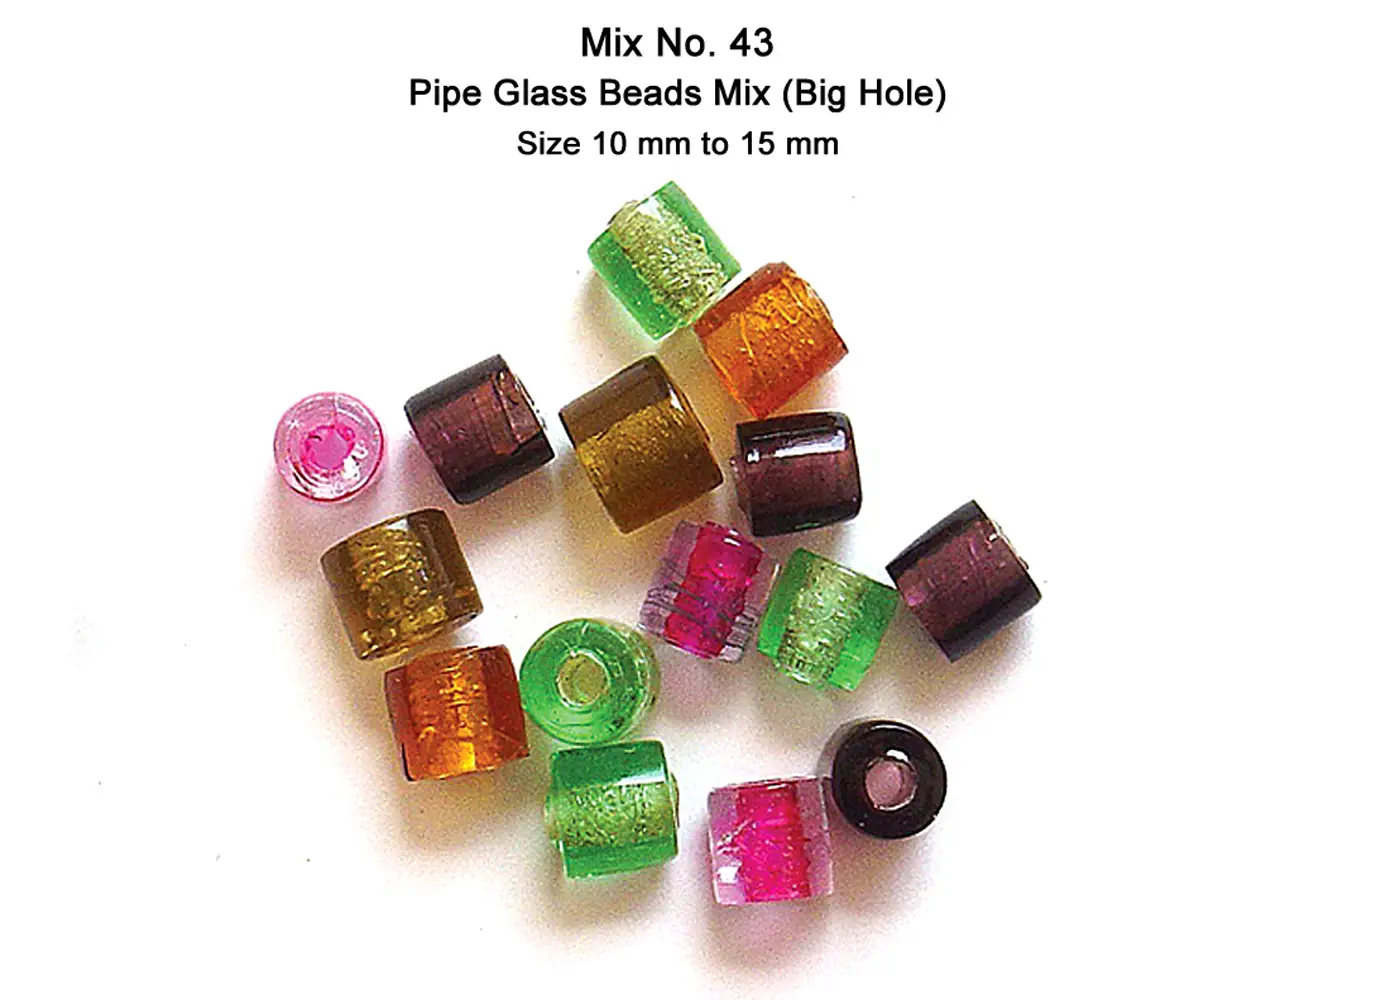 Pipe Glass Beads Mix (Big Hole) Size 10 mm to 15 mm